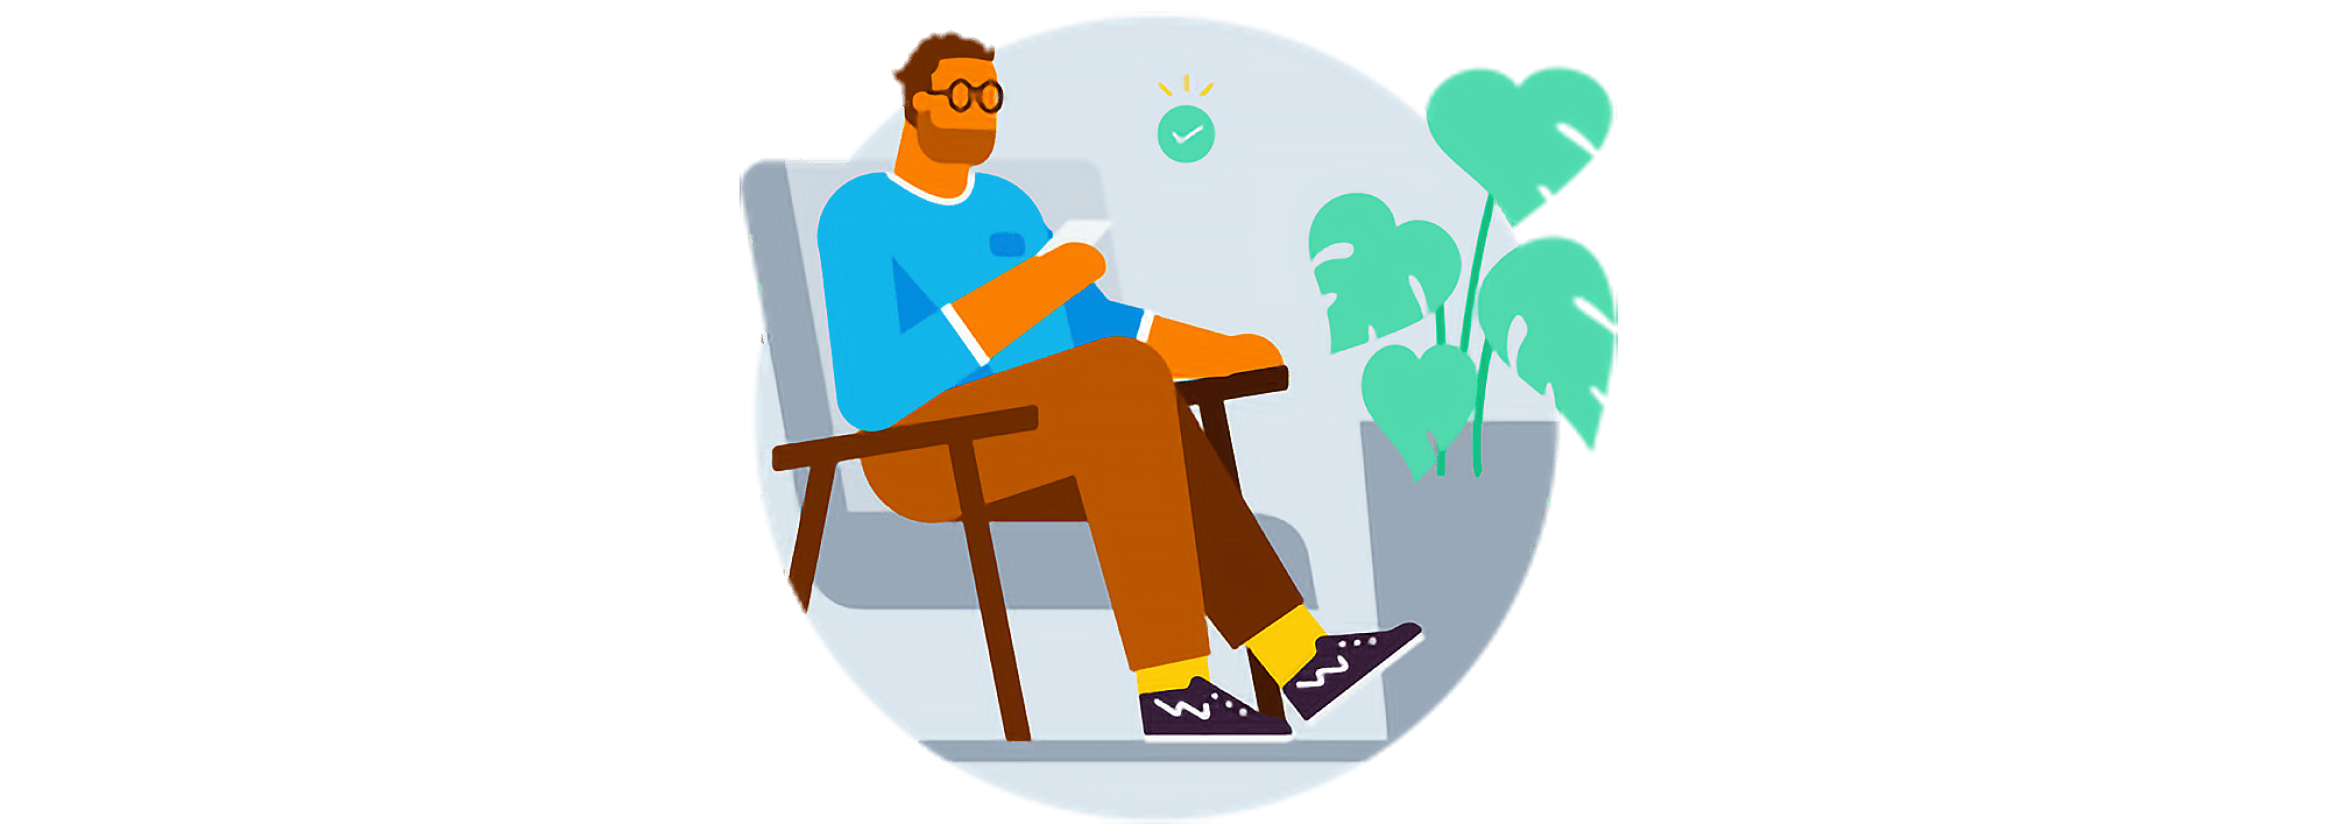 An illustrated person in a chair checking their phone with a tick icon floating above it.